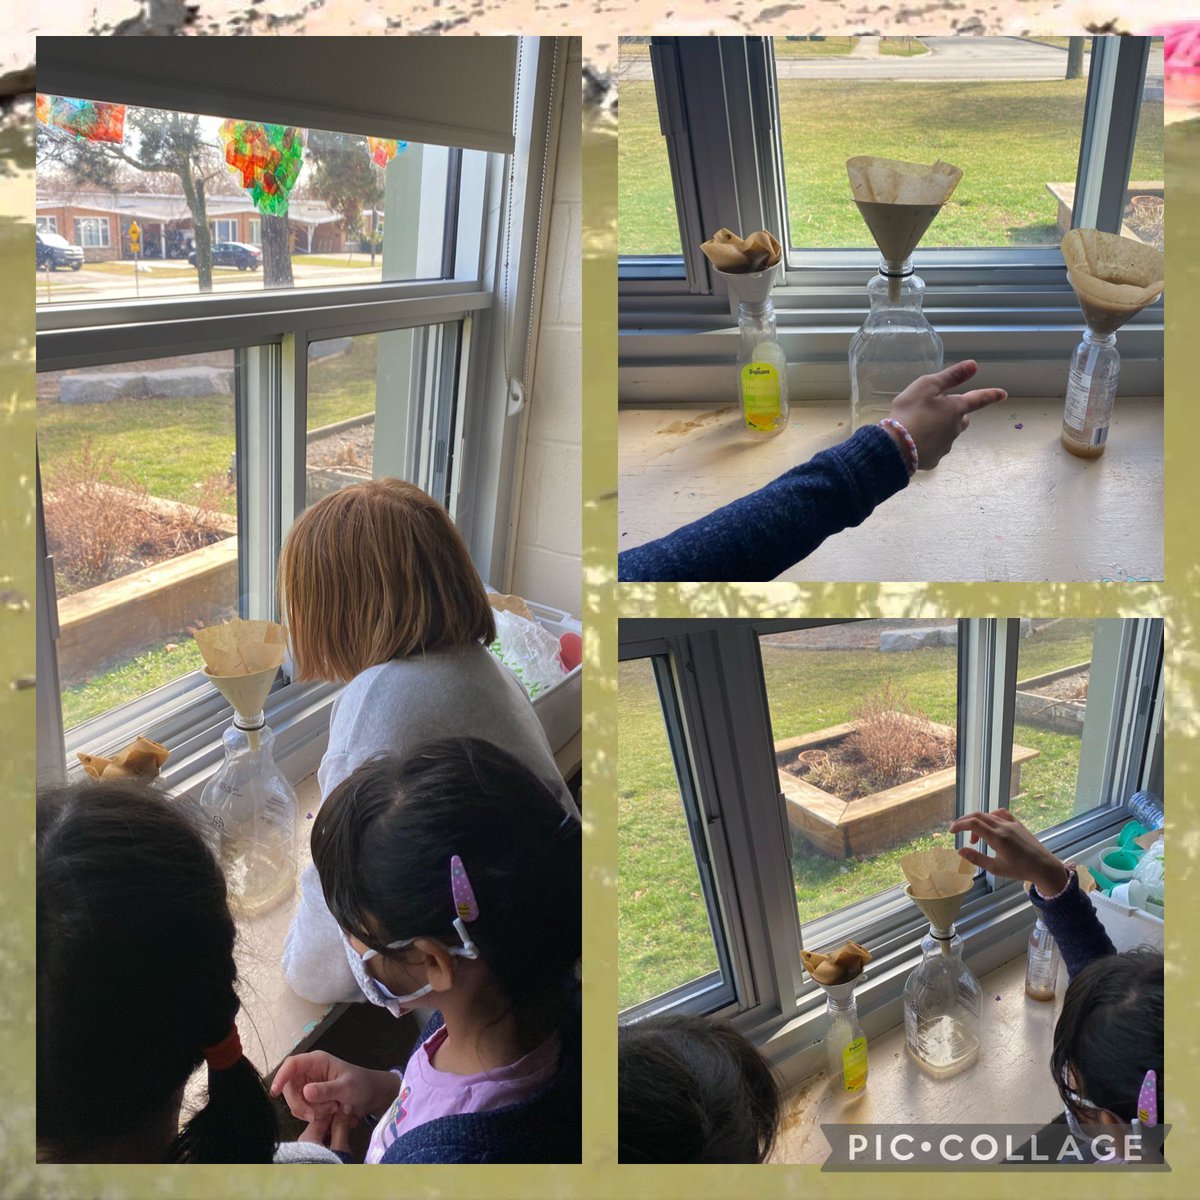 We have been “diving” into water 💧 this week #hiddenHDSB Monday was #WorldWaterDay2021 today we learned where our H2O comes from using “story maps” @ConservHalton we made DYI water filters @clarksdalehdsb we are reflecting on the importance of #cleanwater